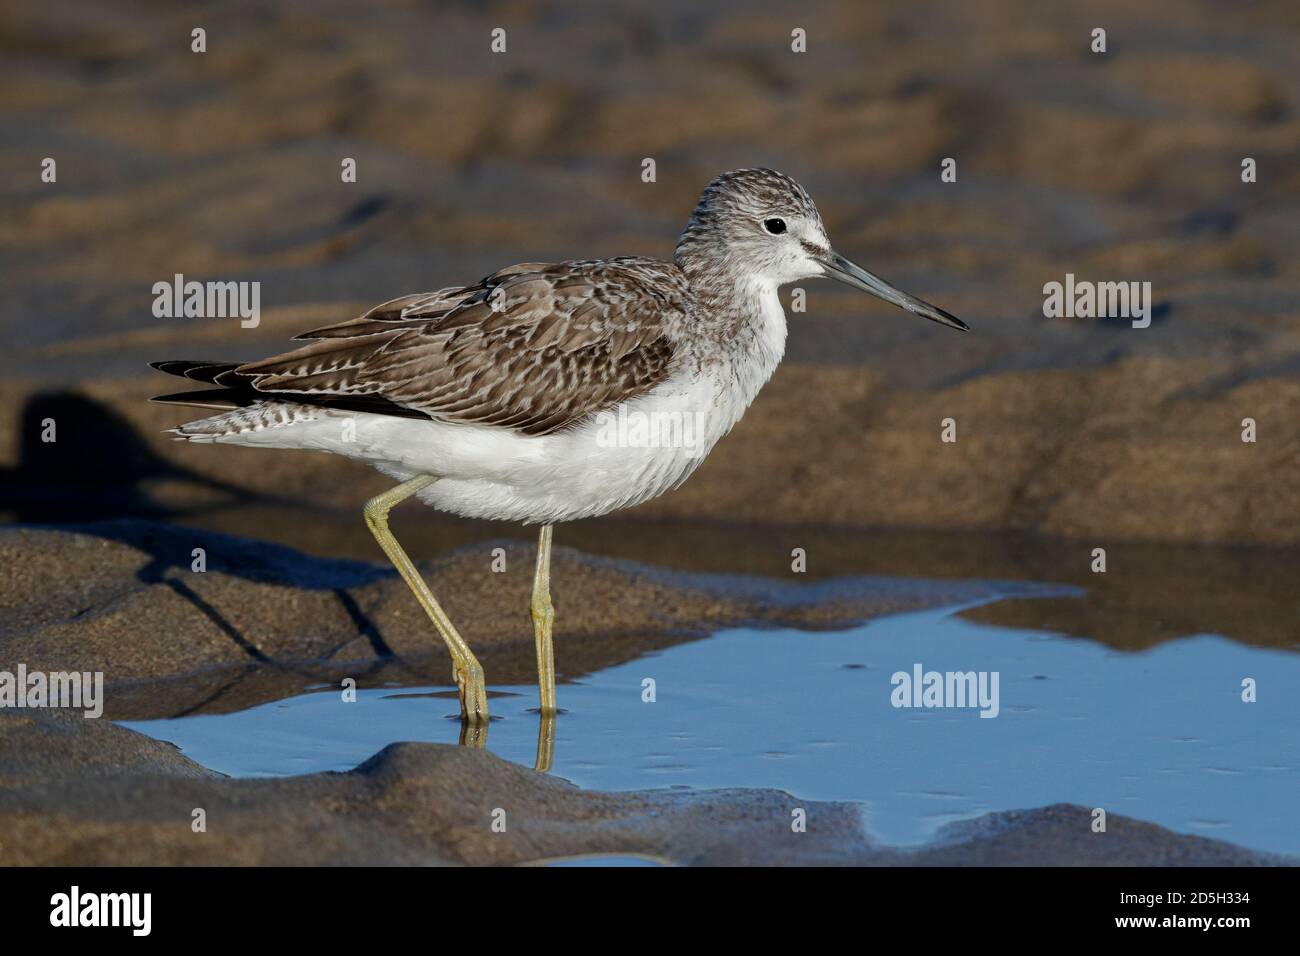 Greenshank (Tringa nebularia), side view of an adult standing on the shore with a caught eel stuck in its nostril, Campania, Italy Stock Photo